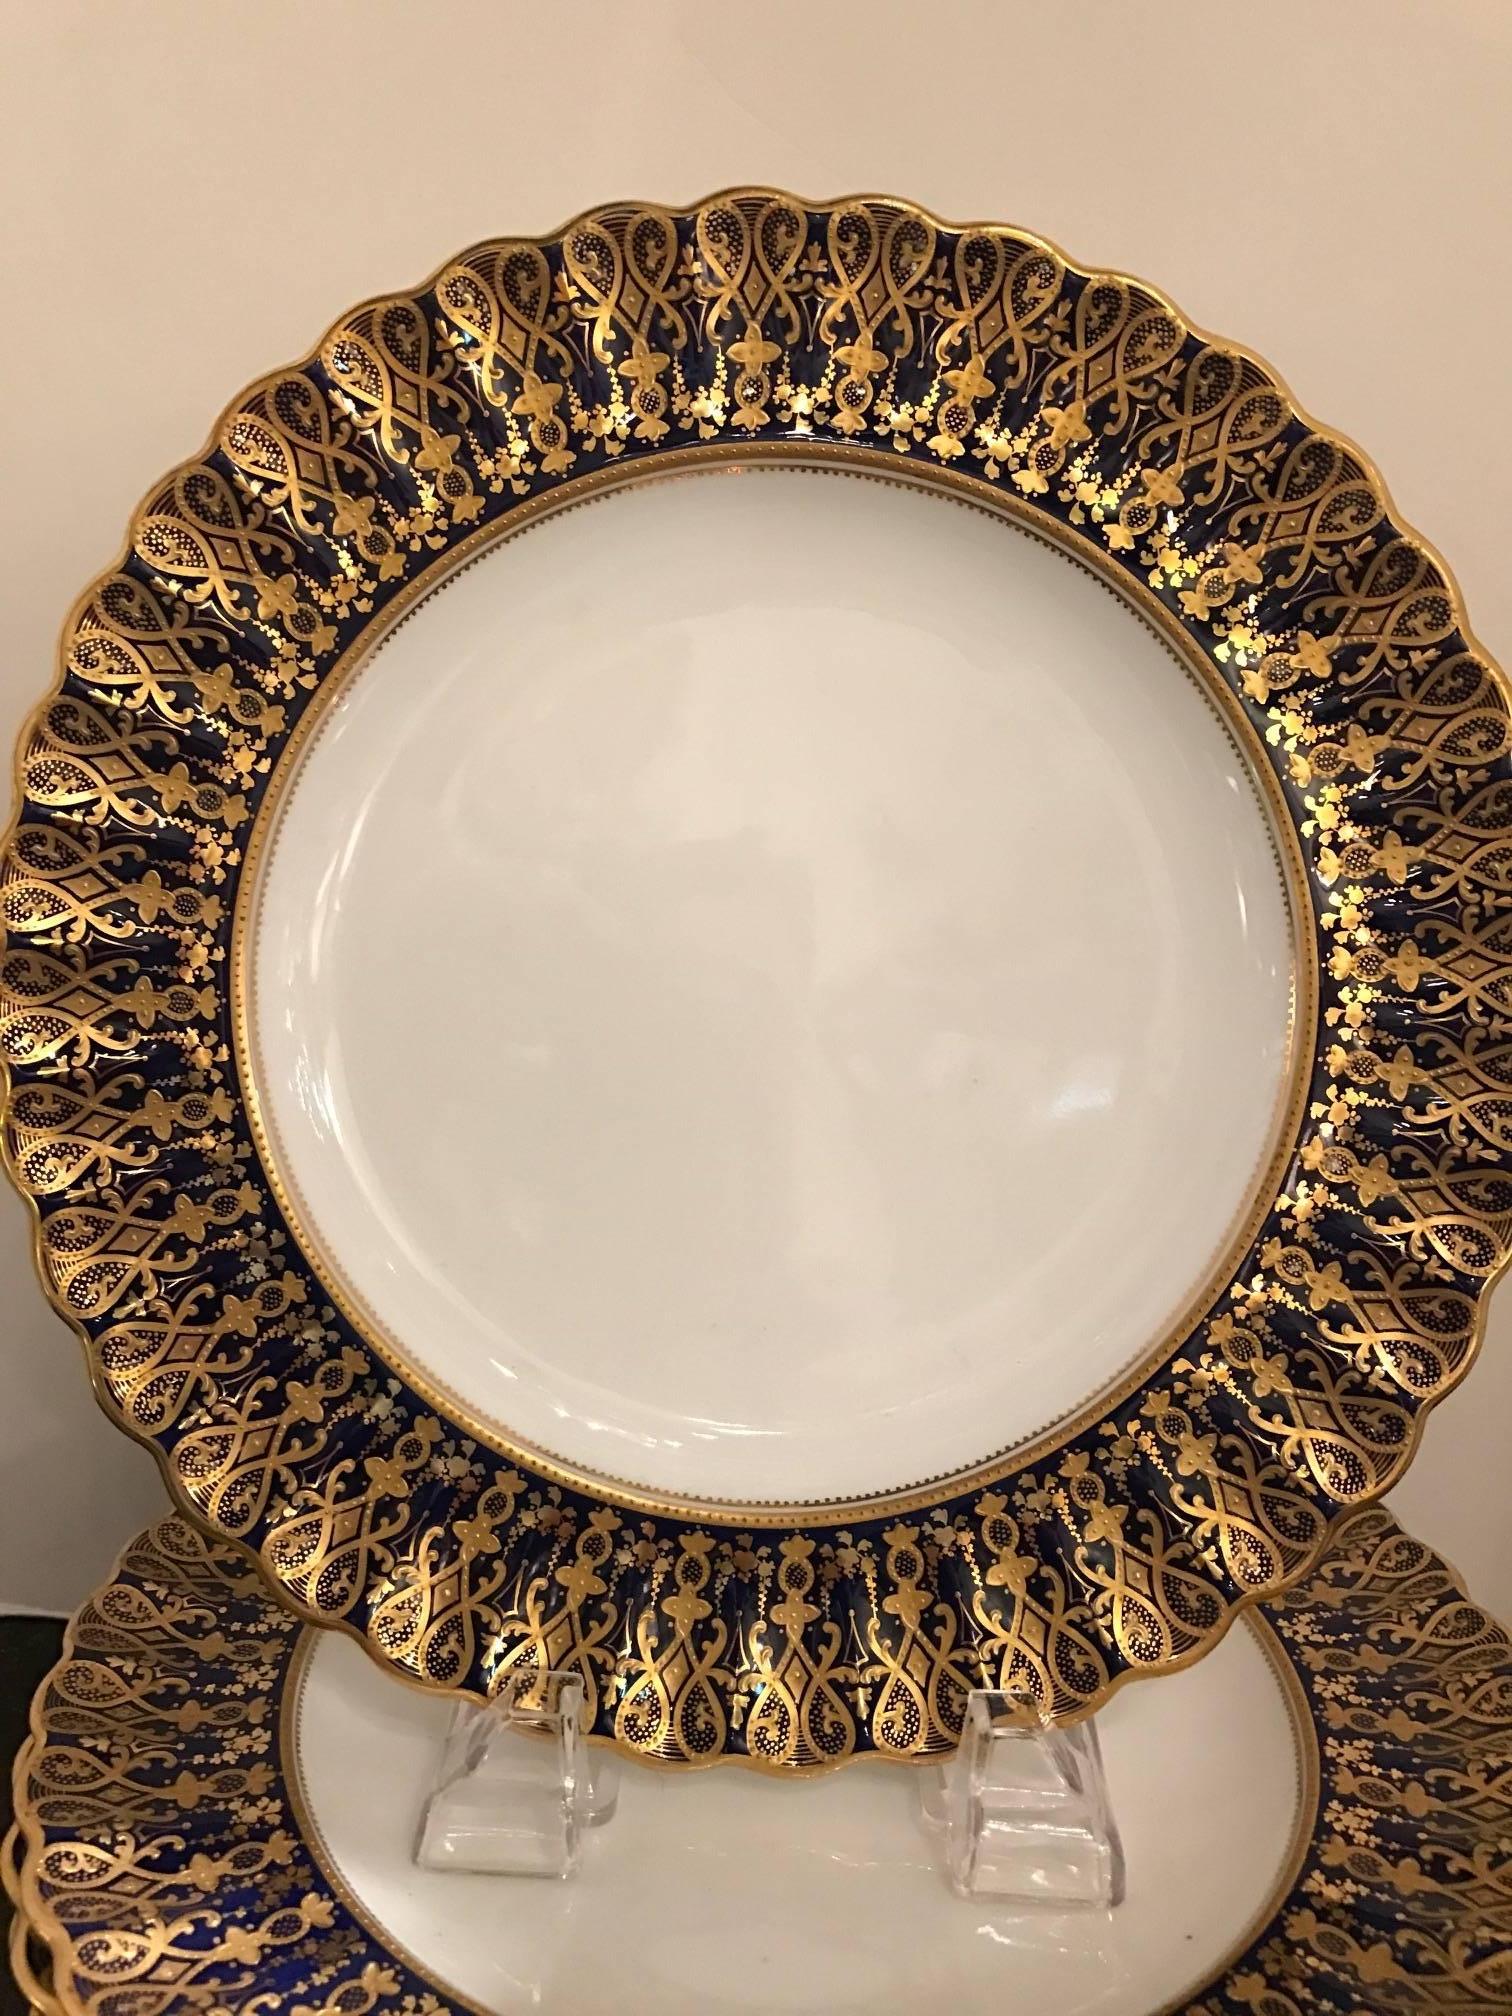 19th century 12 scalloped edge hand painted raised gilt cobalt border plates made in England by Copeland. The elaborate and intricate borders are complacently hand-painted by expert decorators and truly lavish with the gold and deep cobalt blue. The